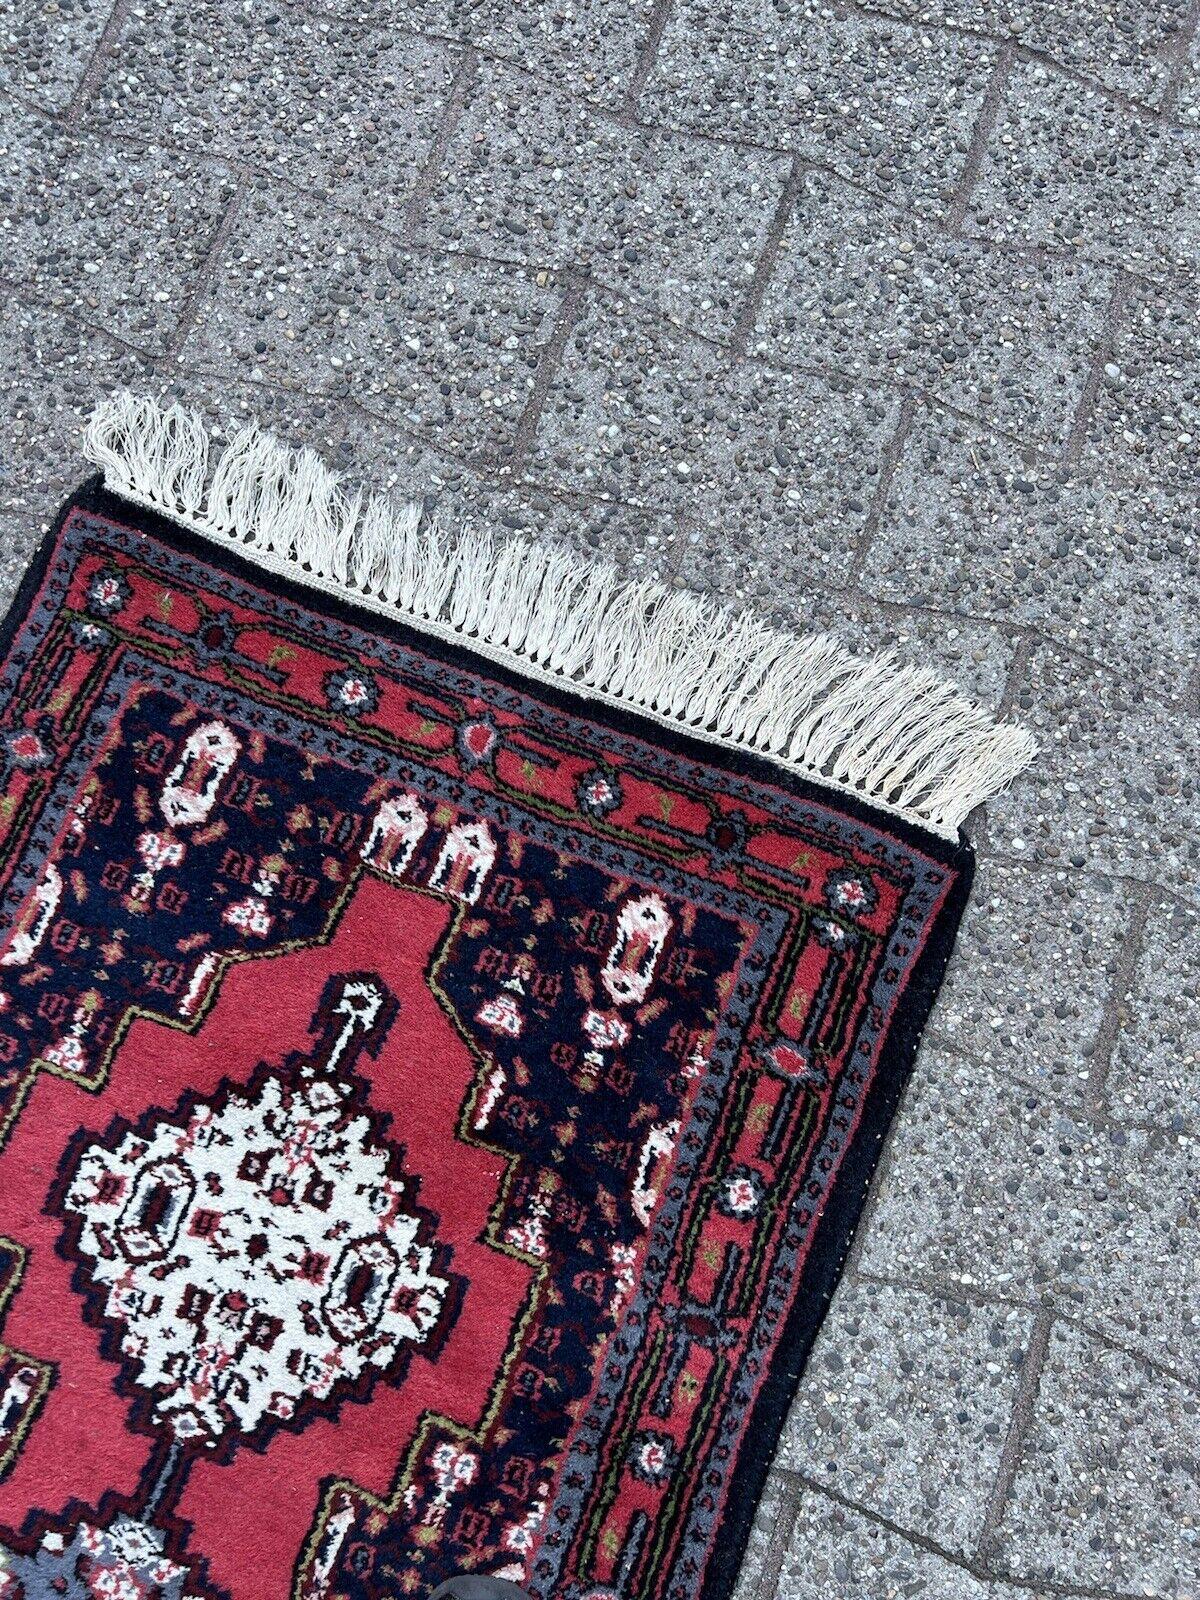  Introduce a piece of Persian heritage into your home with this Handmade Vintage Persian Style Hamadan Rug. Crafted in the 1970s, this rug measures 2.1’ x 4.4’ (66cm x 137cm) and is a fine example of traditional Hamadan weaving.

The rug is in good